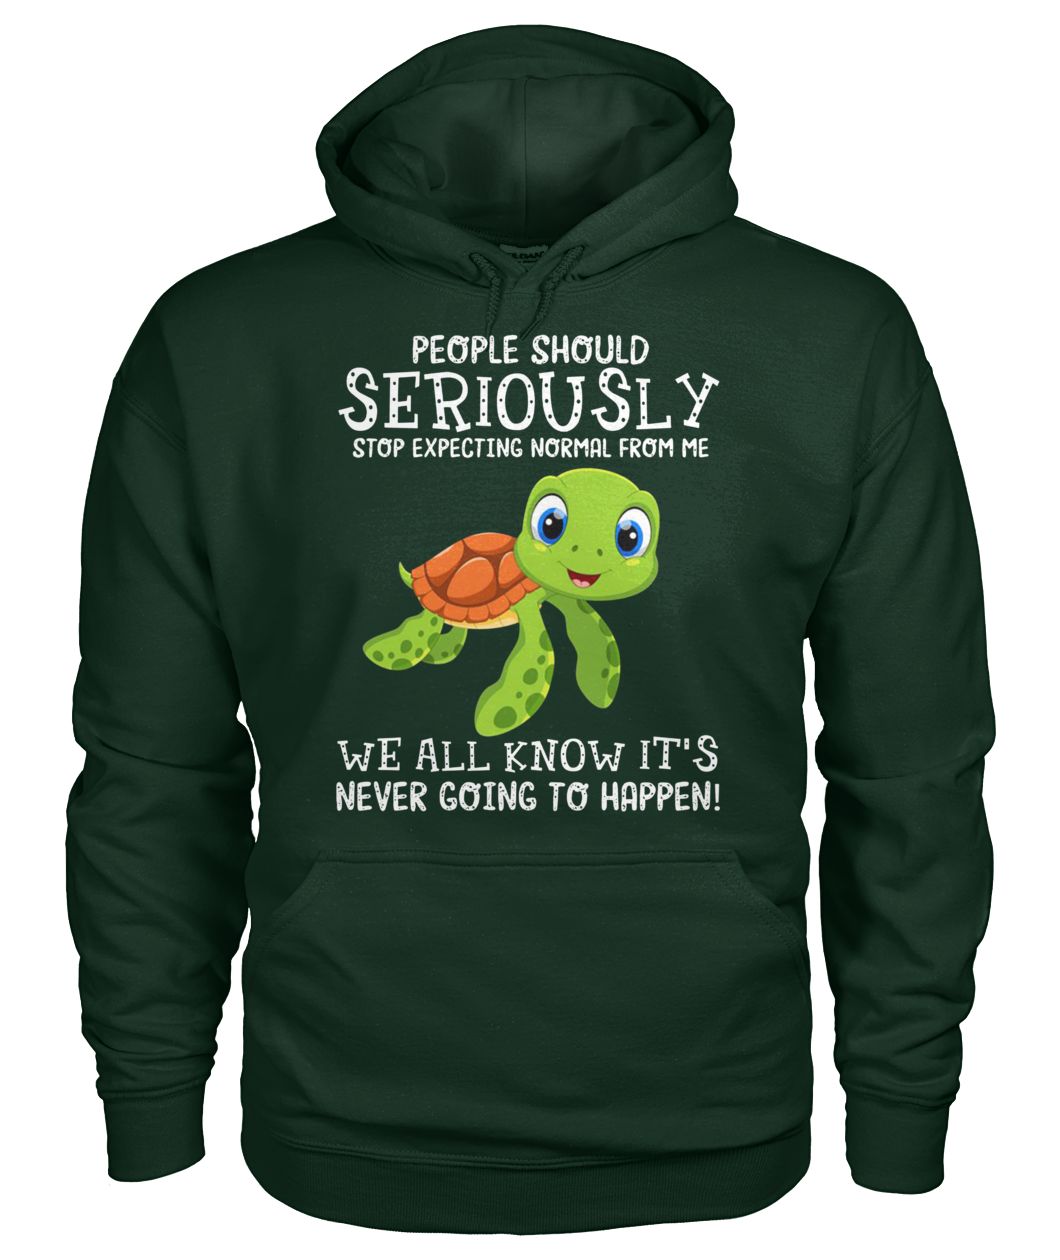 People should seriously stop expecting normal from me baby turtle gildan hoodie